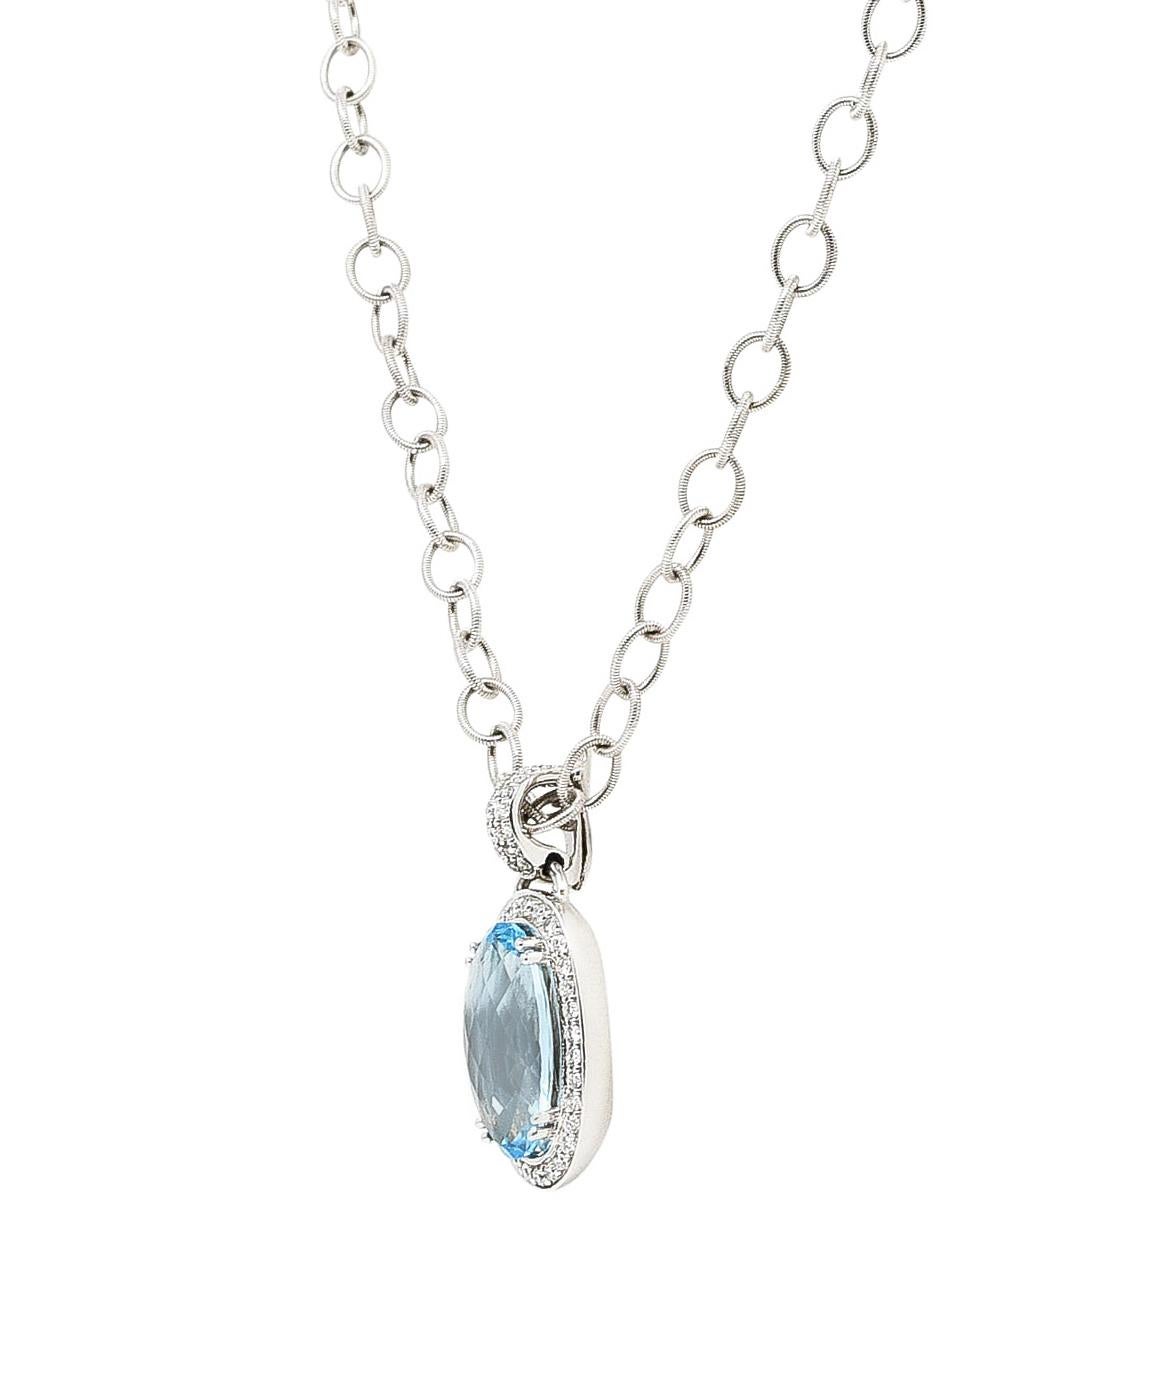 Cable chain necklace is comprised of deeply ridged oval links

Suspending an elongated oval drop that centers faceted oval cut topaz

Measuring approximately 18.0 x 10.0 mm - transparent with slightly greenish blue color

Surrounded by a round